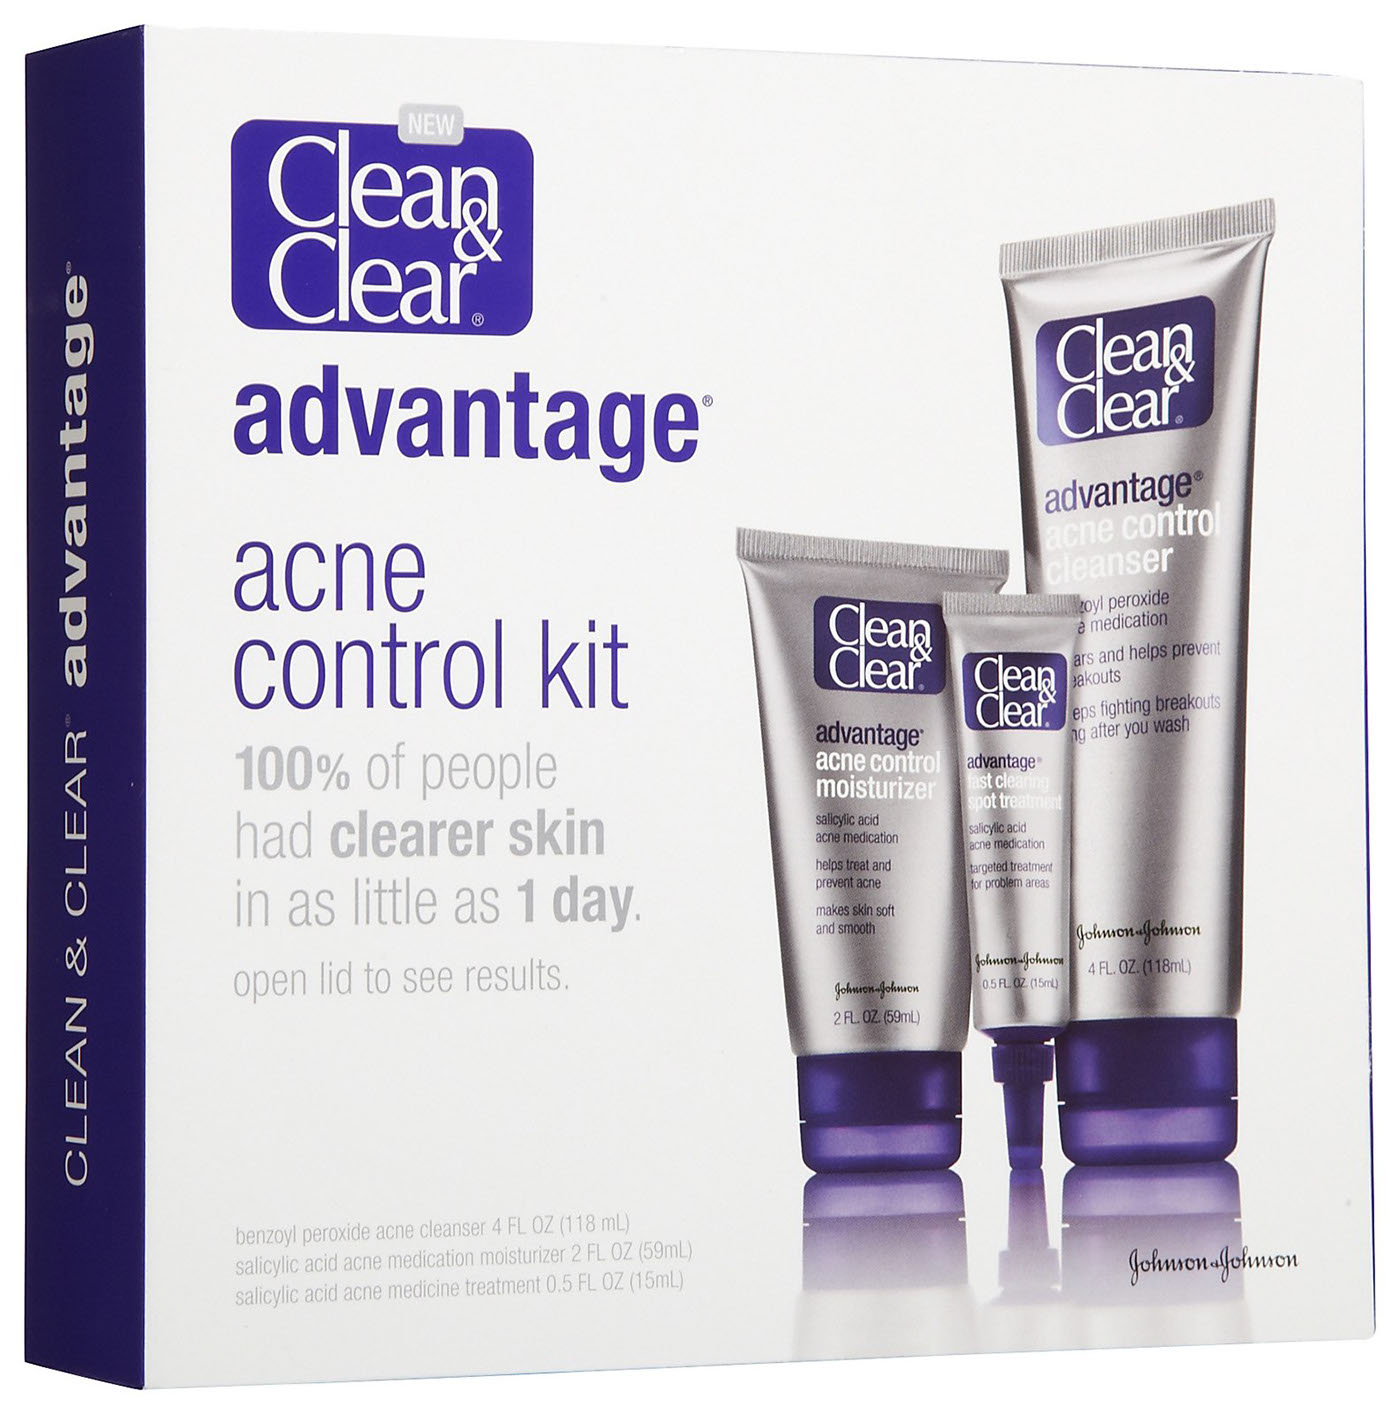 Clear control. Clean & Clear, Continuous Control acne Cleanser. Clean & Clear advantage acne Control. Advantage от clean & Clear.. Skine kleare.